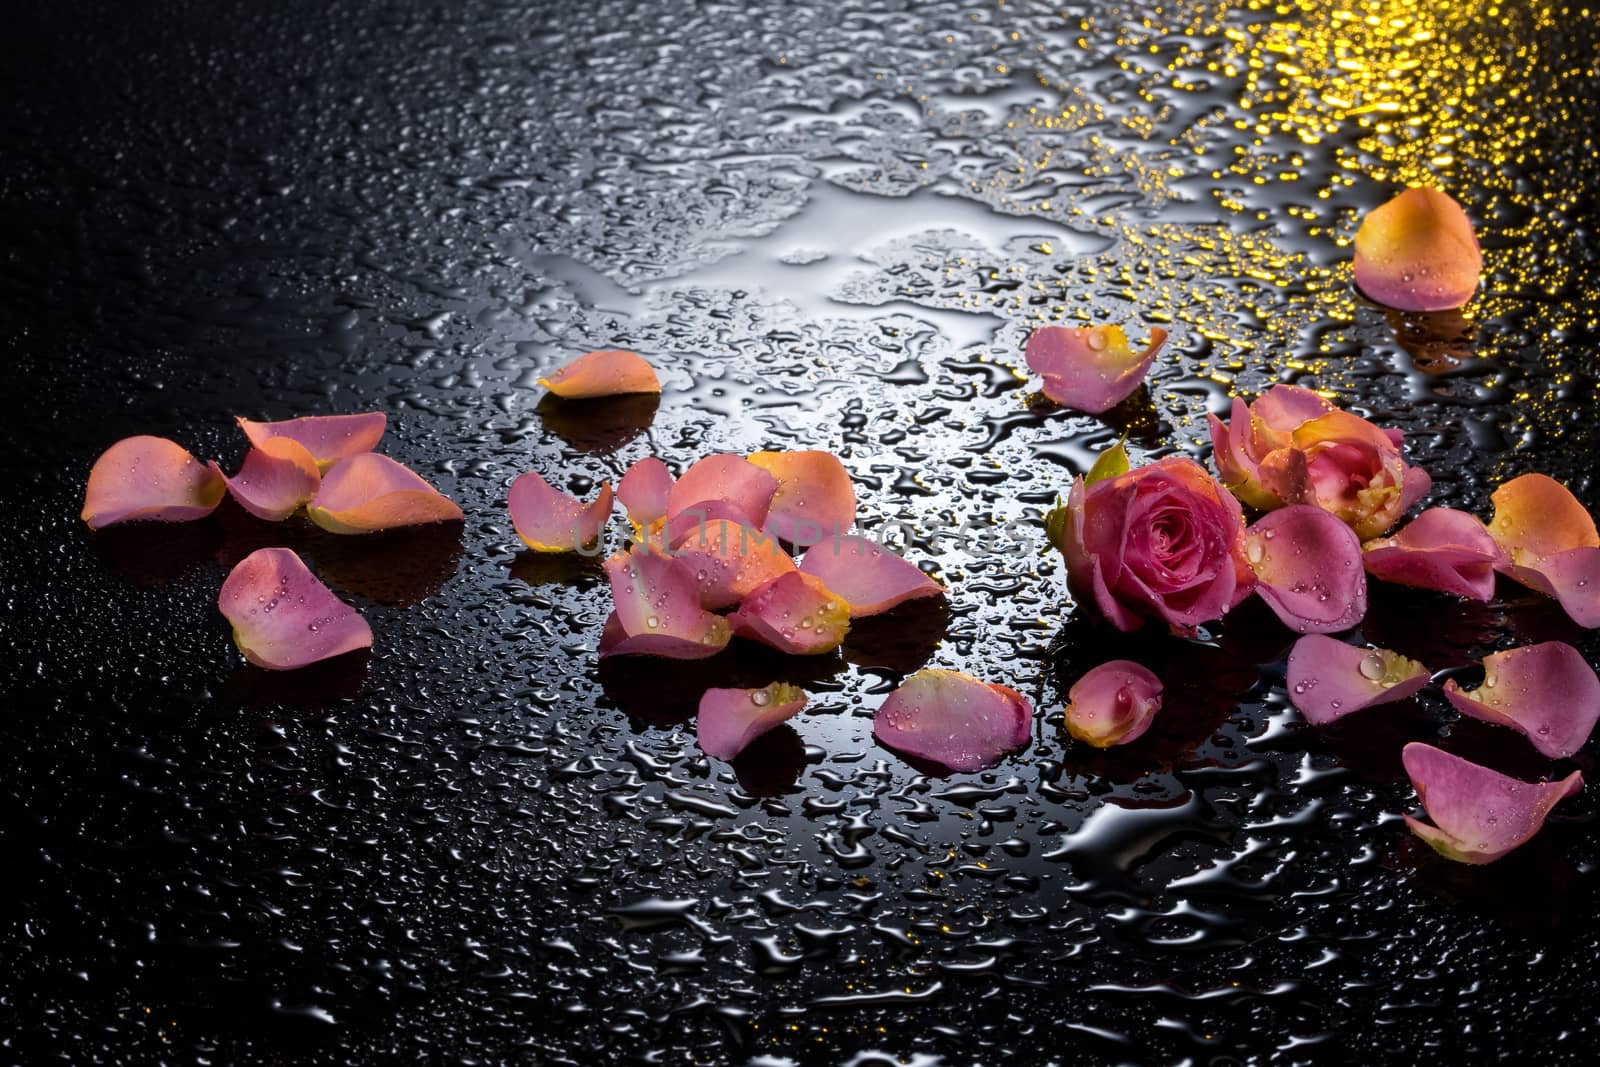 Rose petals on a black background with water drops